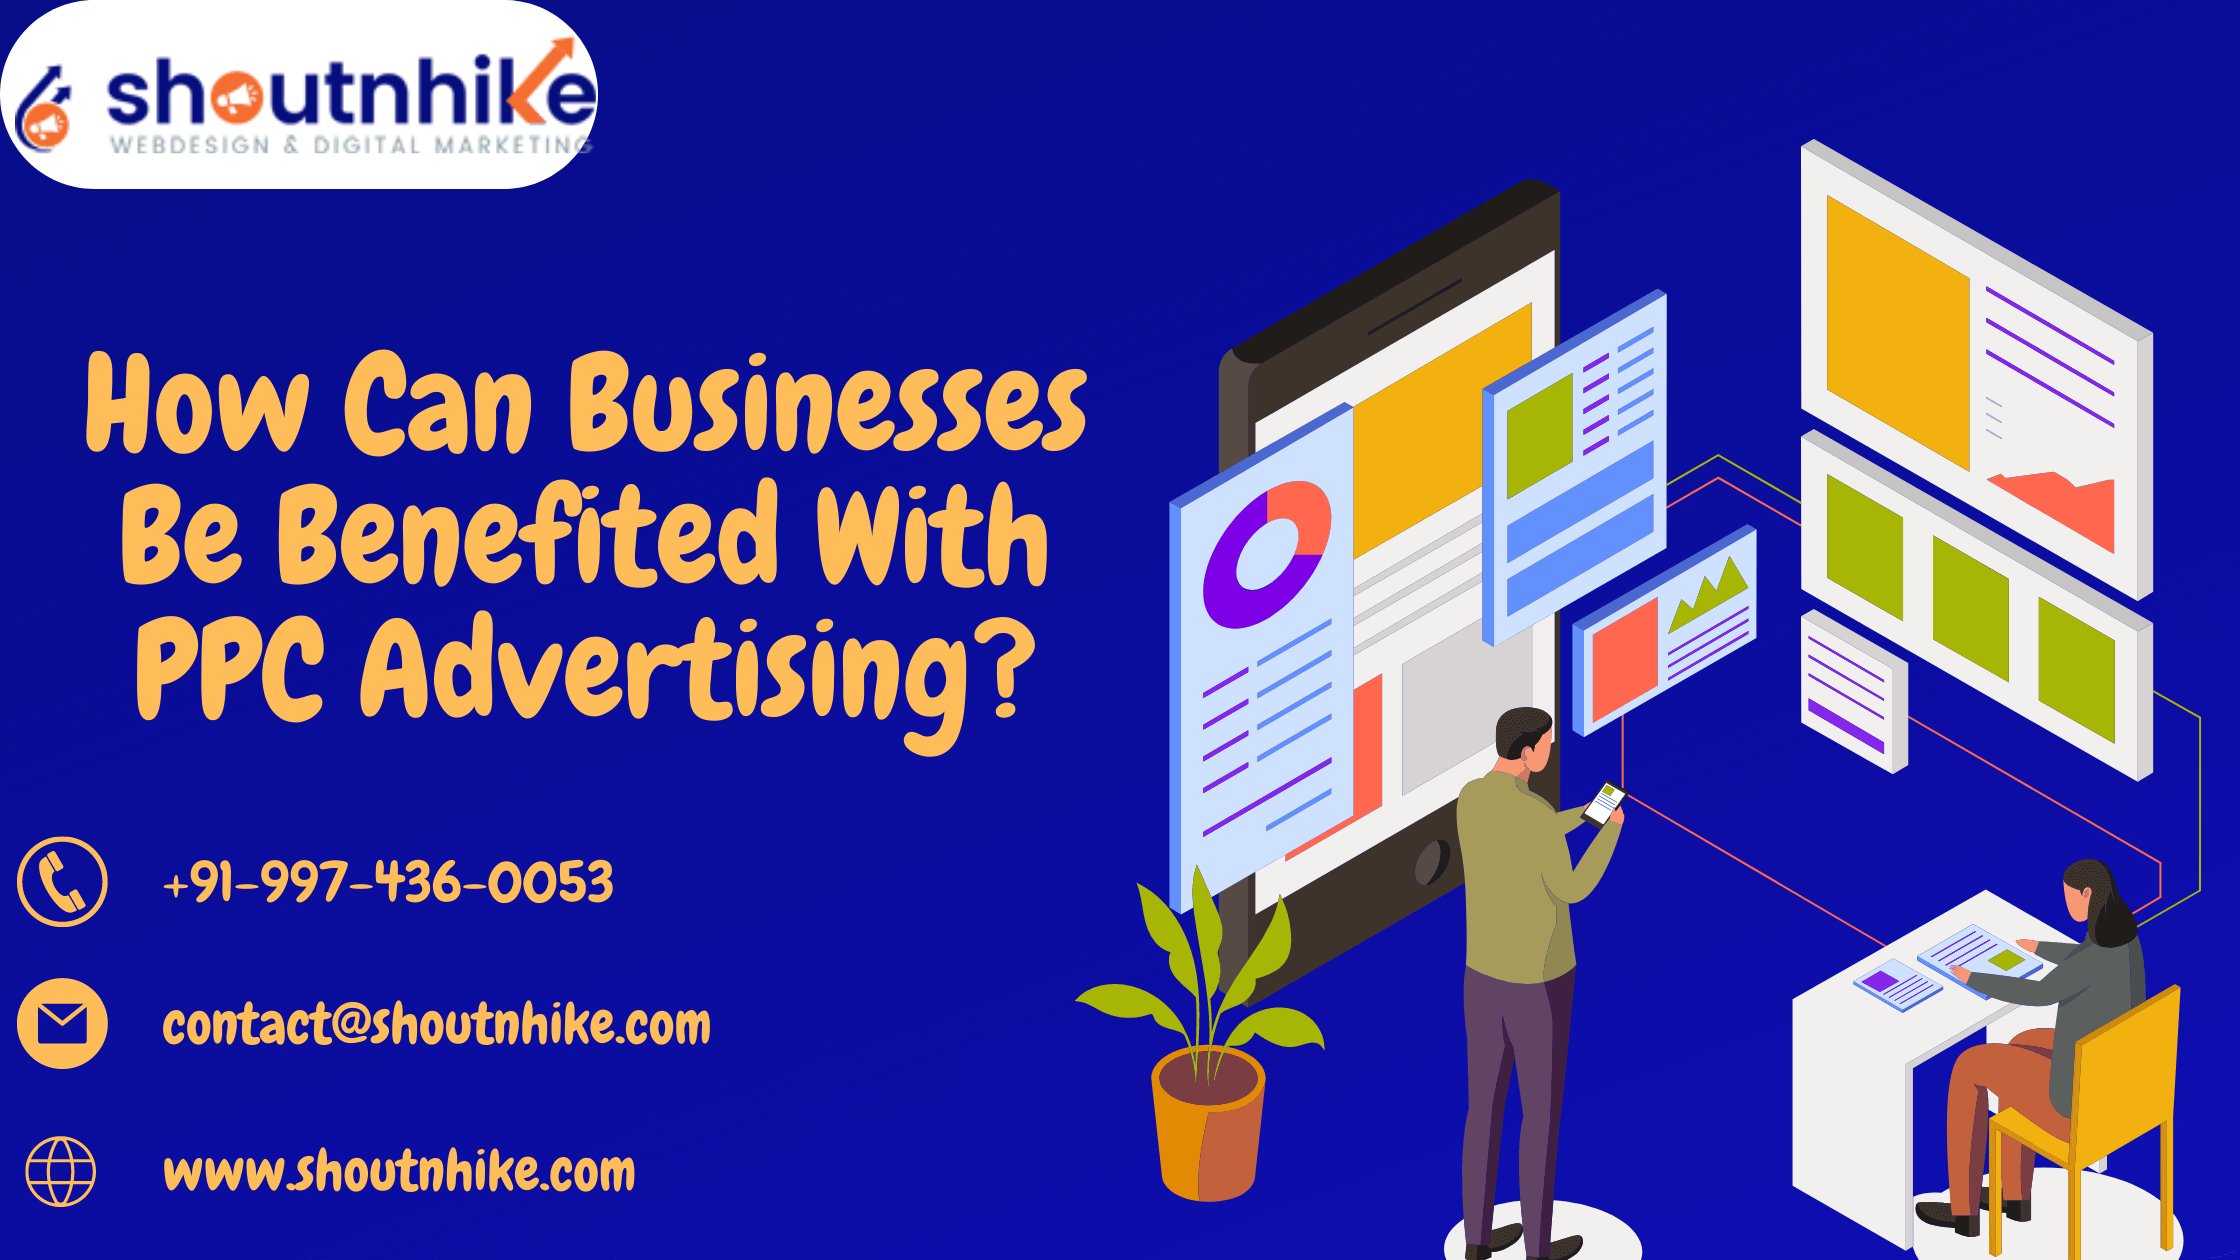 How Can Businesses Be Benefited With PPC Advertising?